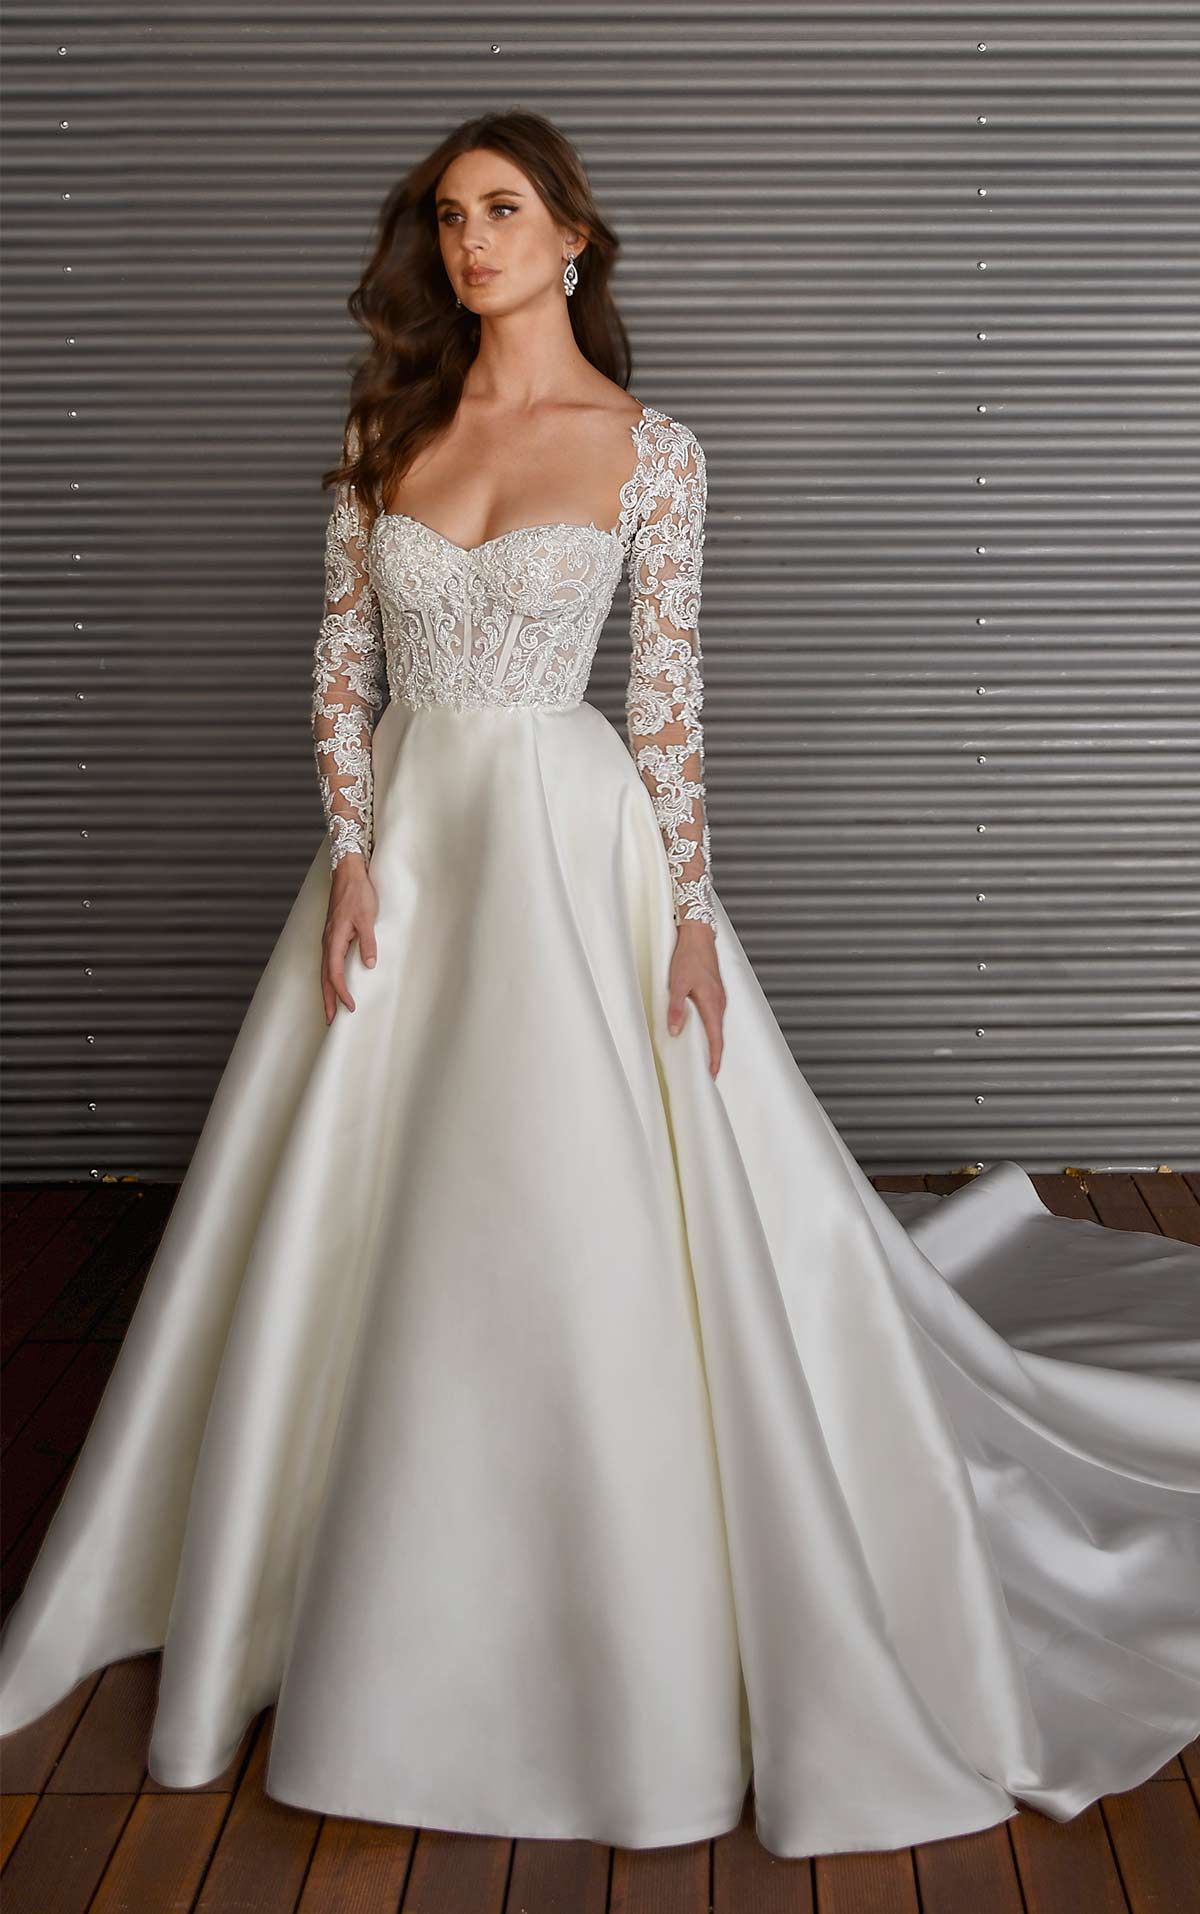 Classic Ball Gown Wedding Dress With Sweetheart Neckline And Detachable Tulle Jacket